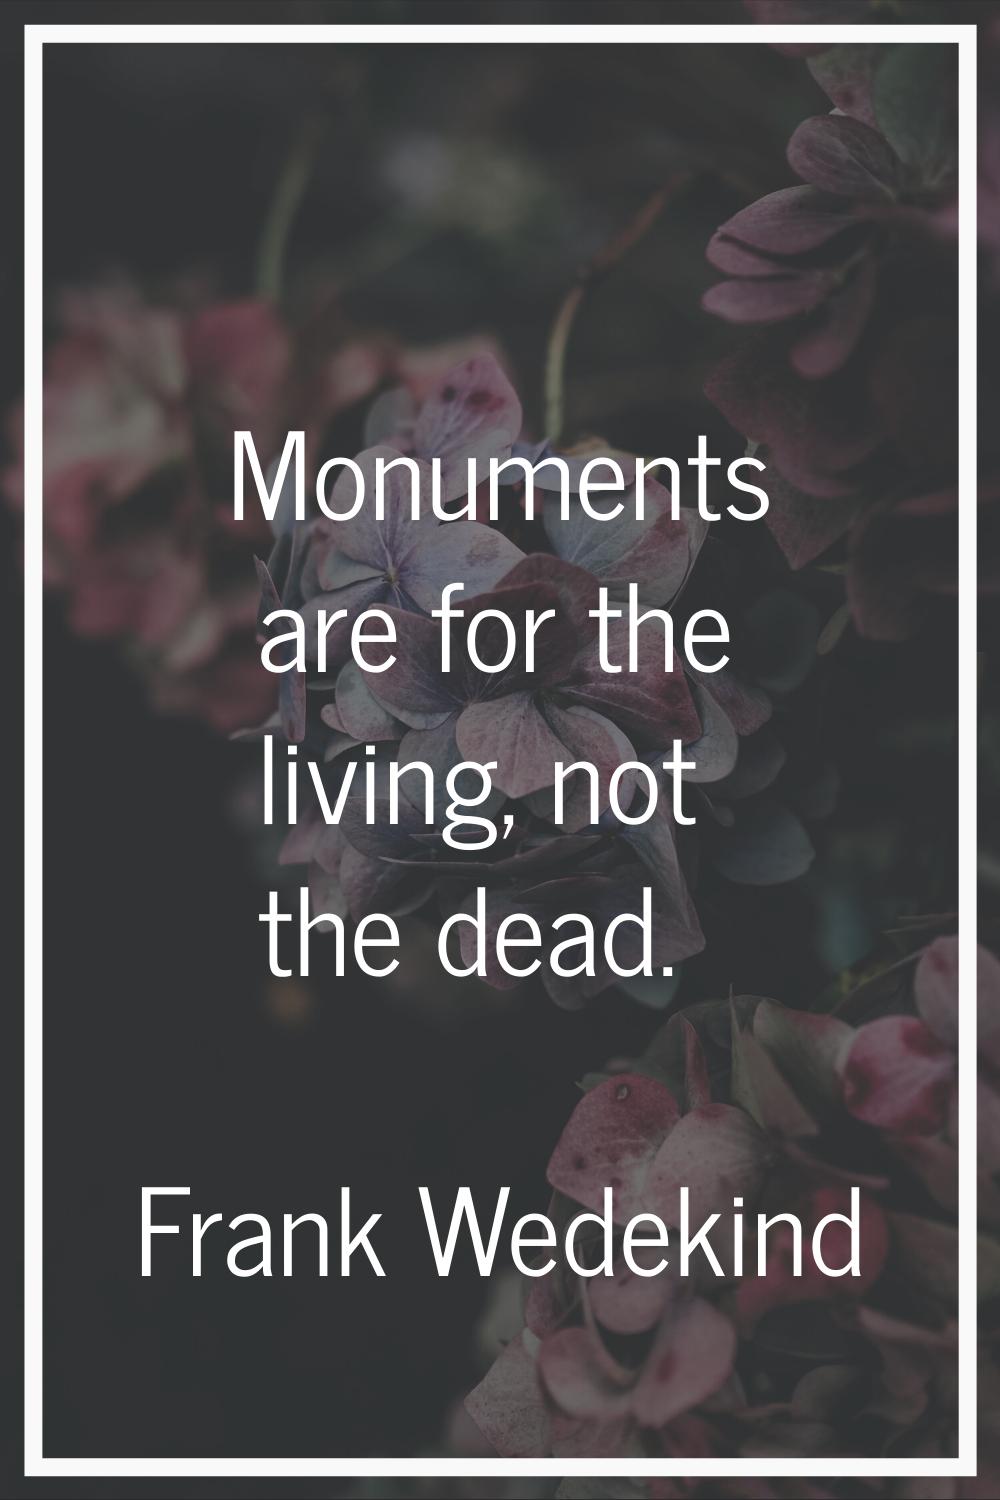 Monuments are for the living, not the dead.